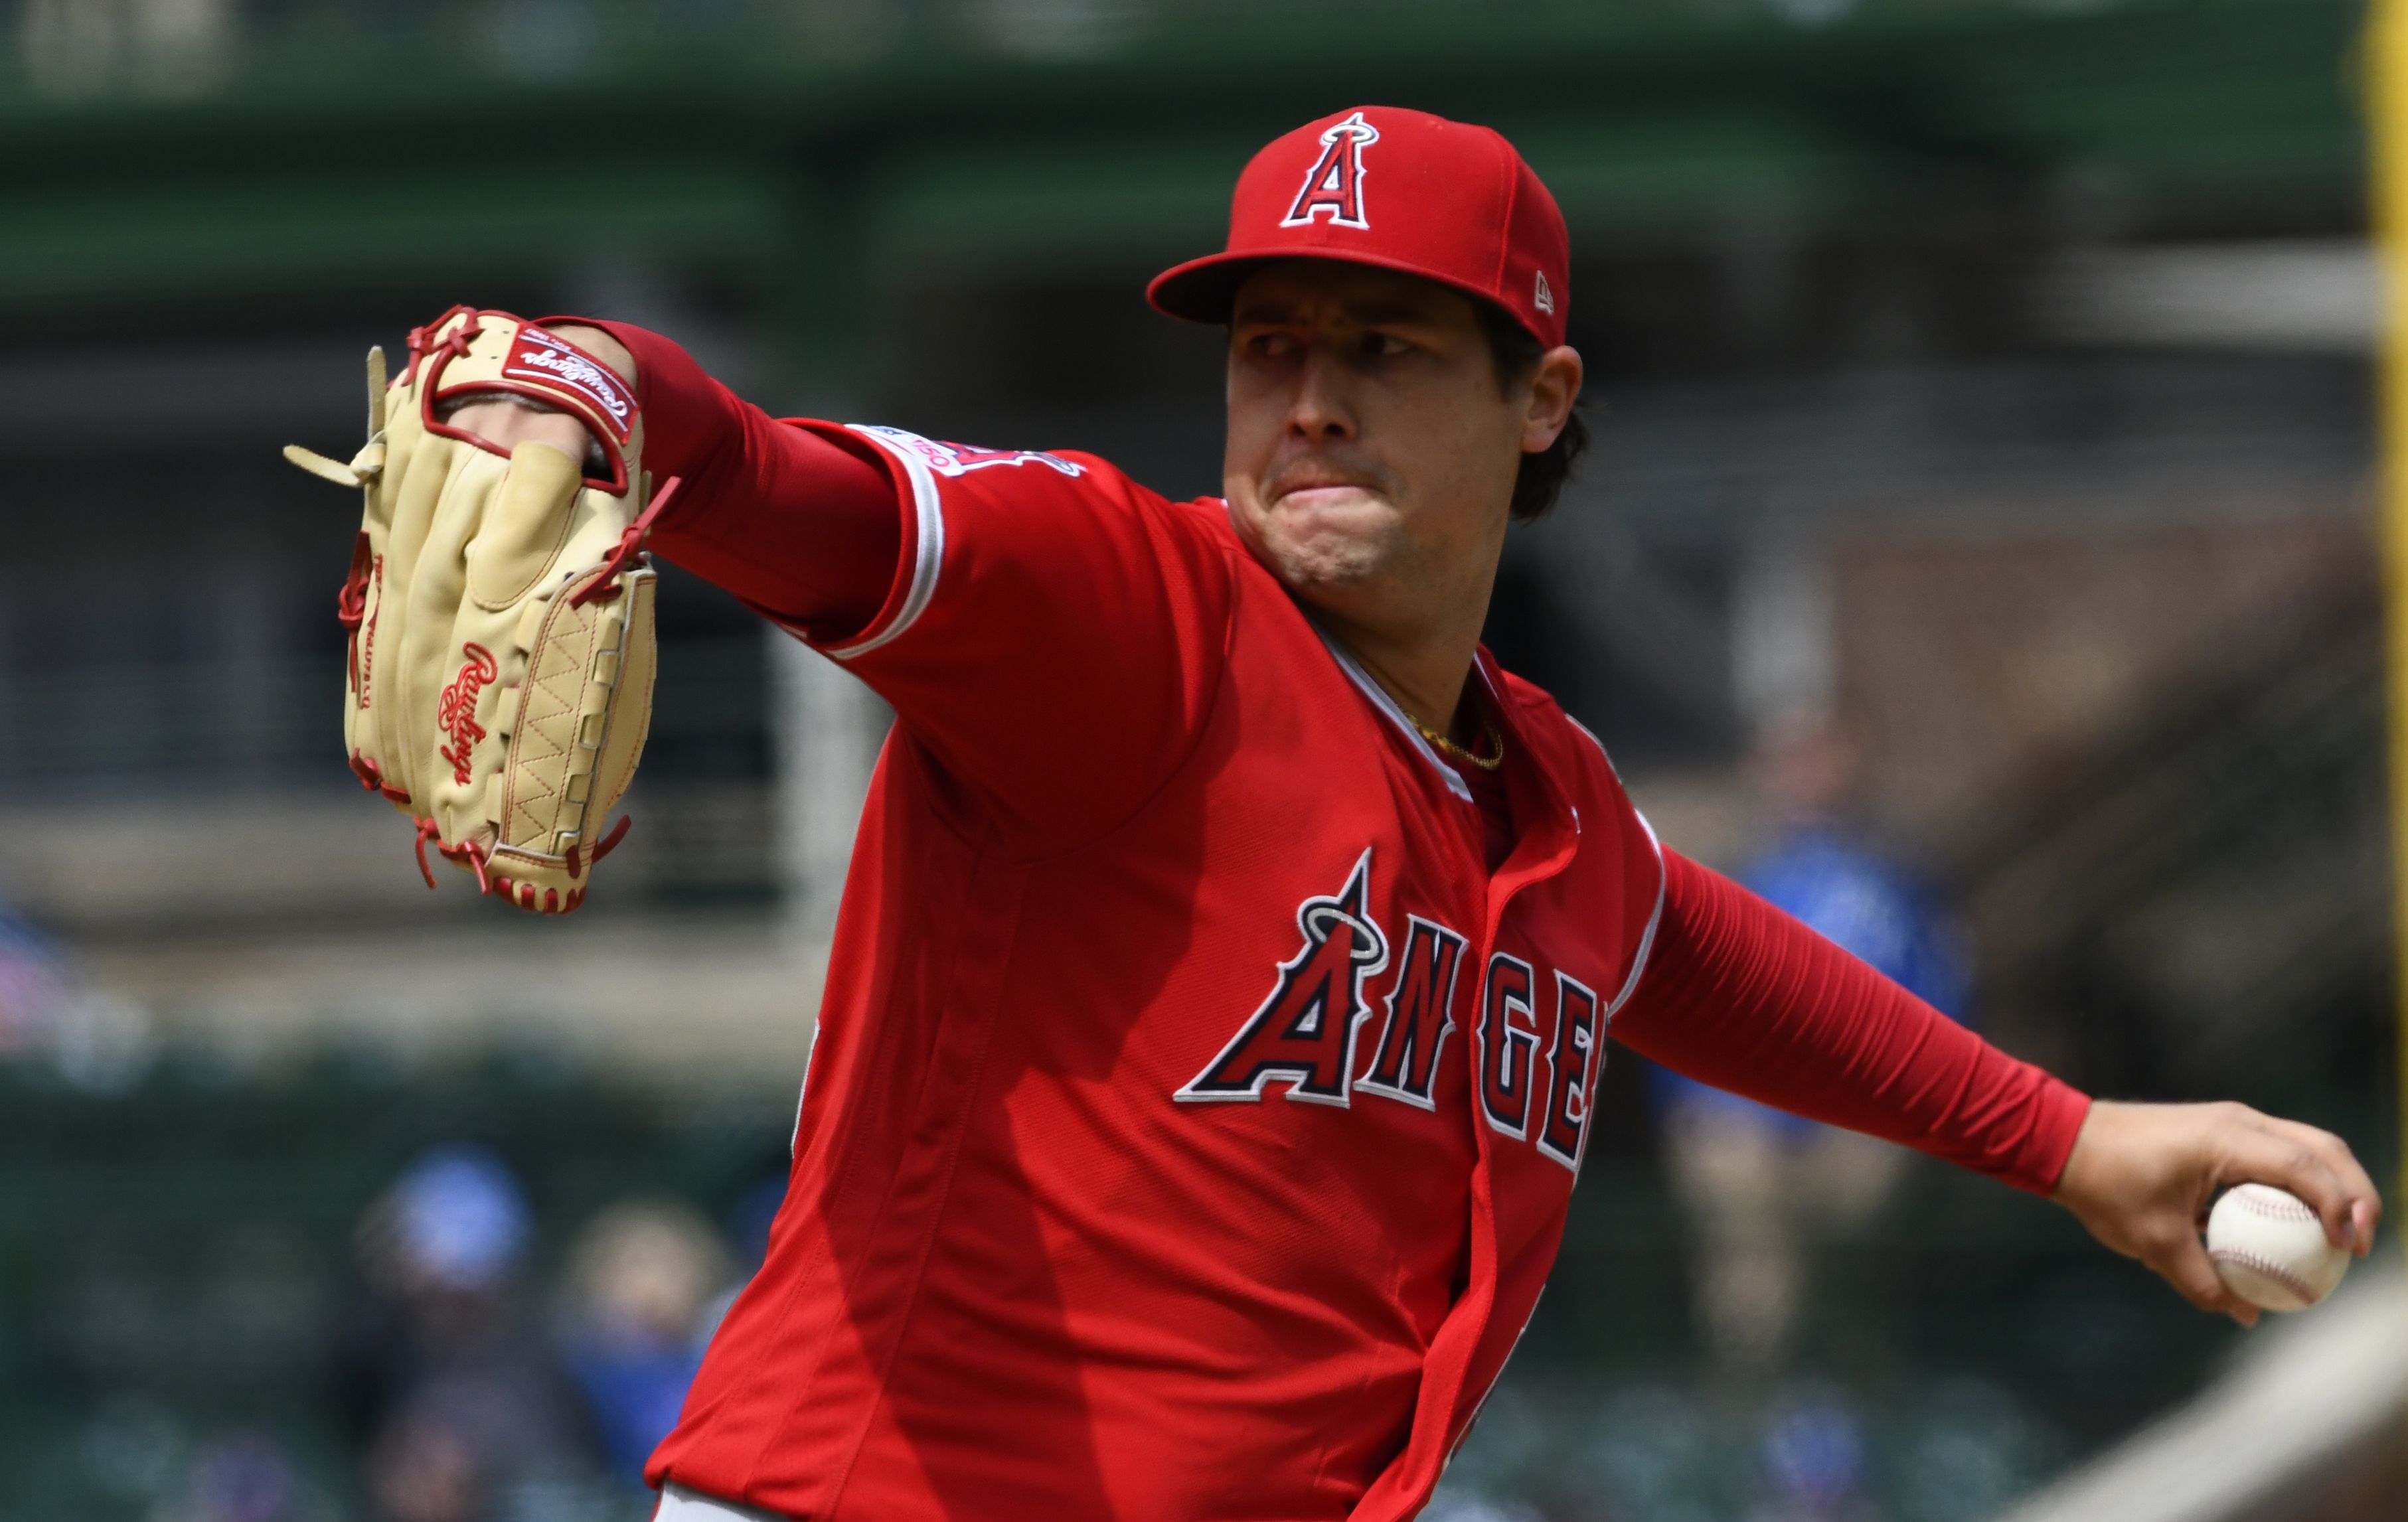 Mother and widow of late MLB player Tyler Skaggs break their